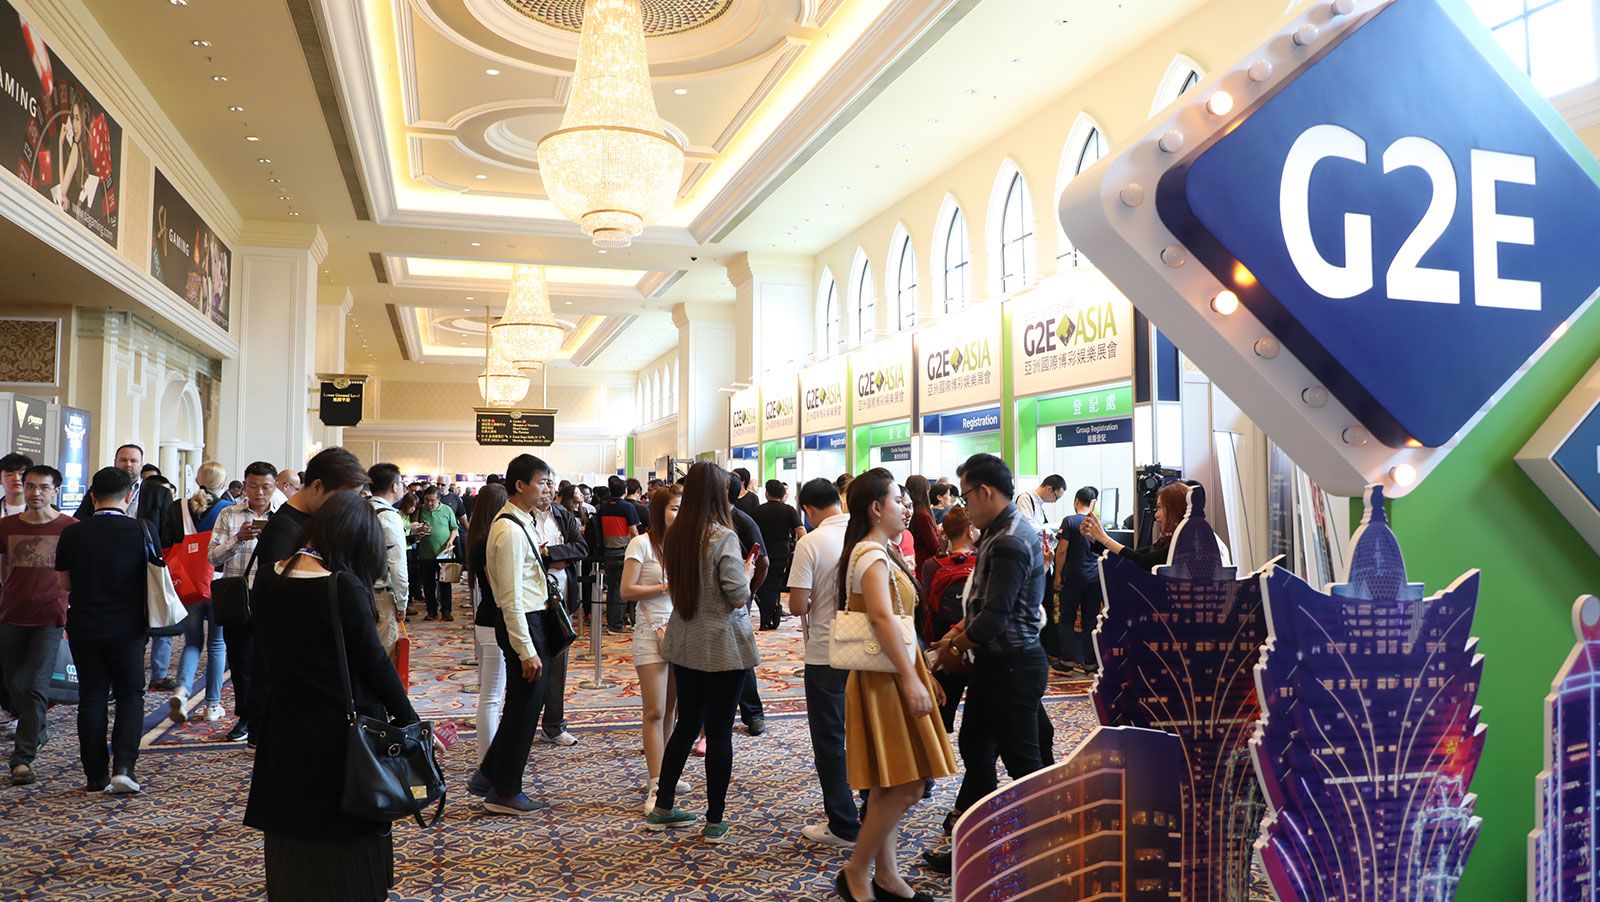 GE2 Asia 2018 will Highlight all the Key Industry Segments